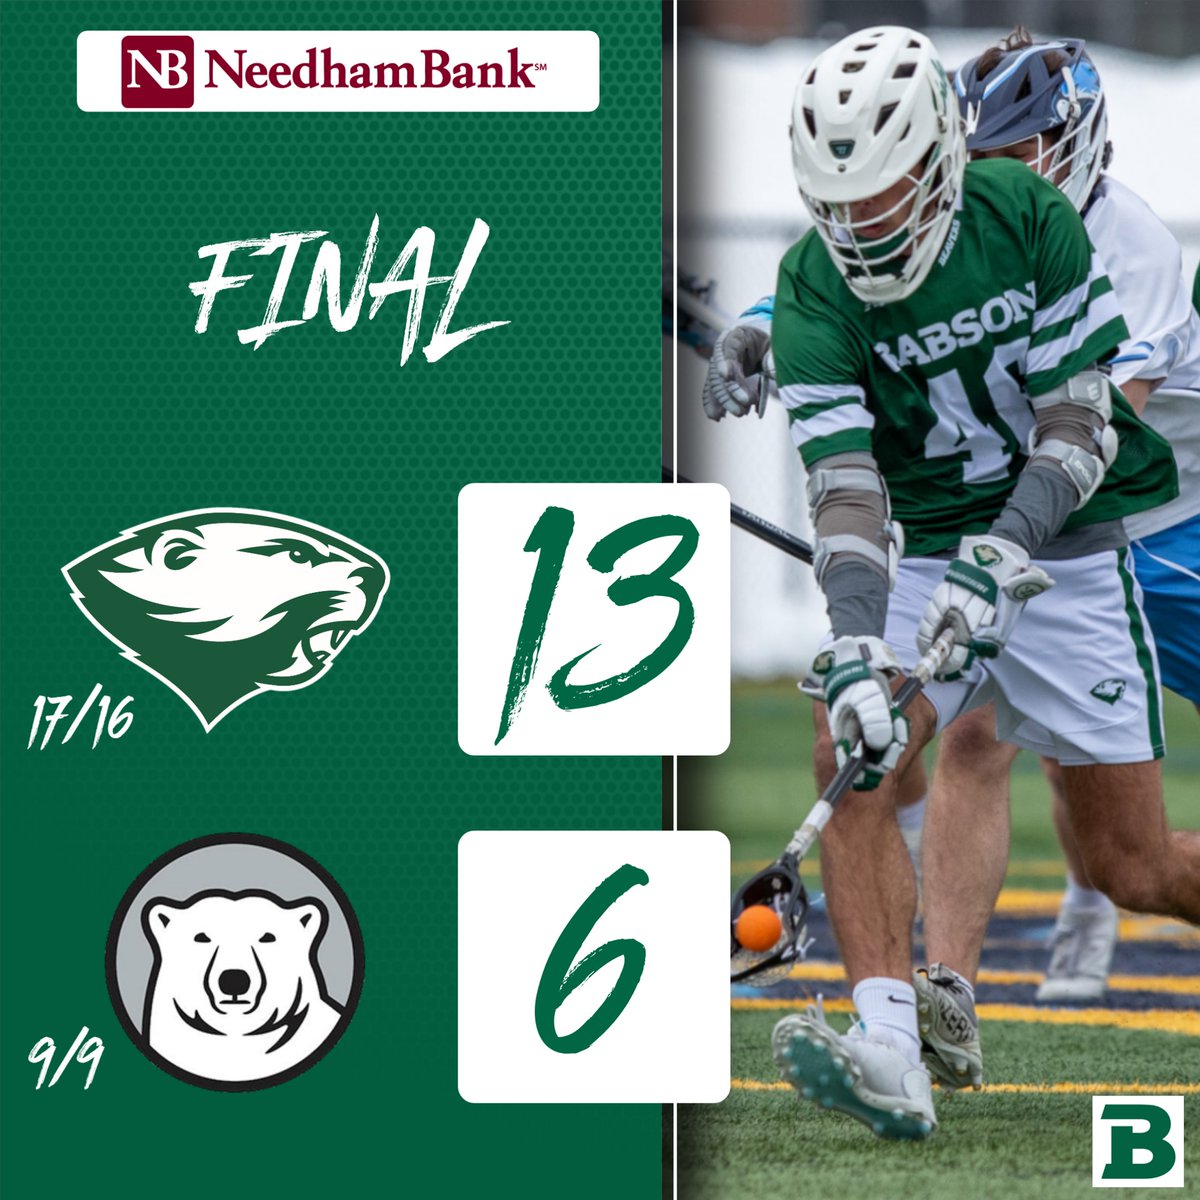 Jacob Tauss, Jared Rainville, Topher Bower and Seamus Rooney all scored twice, Alex Fascilla made a career-high 21 saves and No. 17/16 @babsonlacrosse used a 10-goal run to knock off No. 9/9 @GoUBears 13-6 on Tuesday night. #GoBabo #d3lax